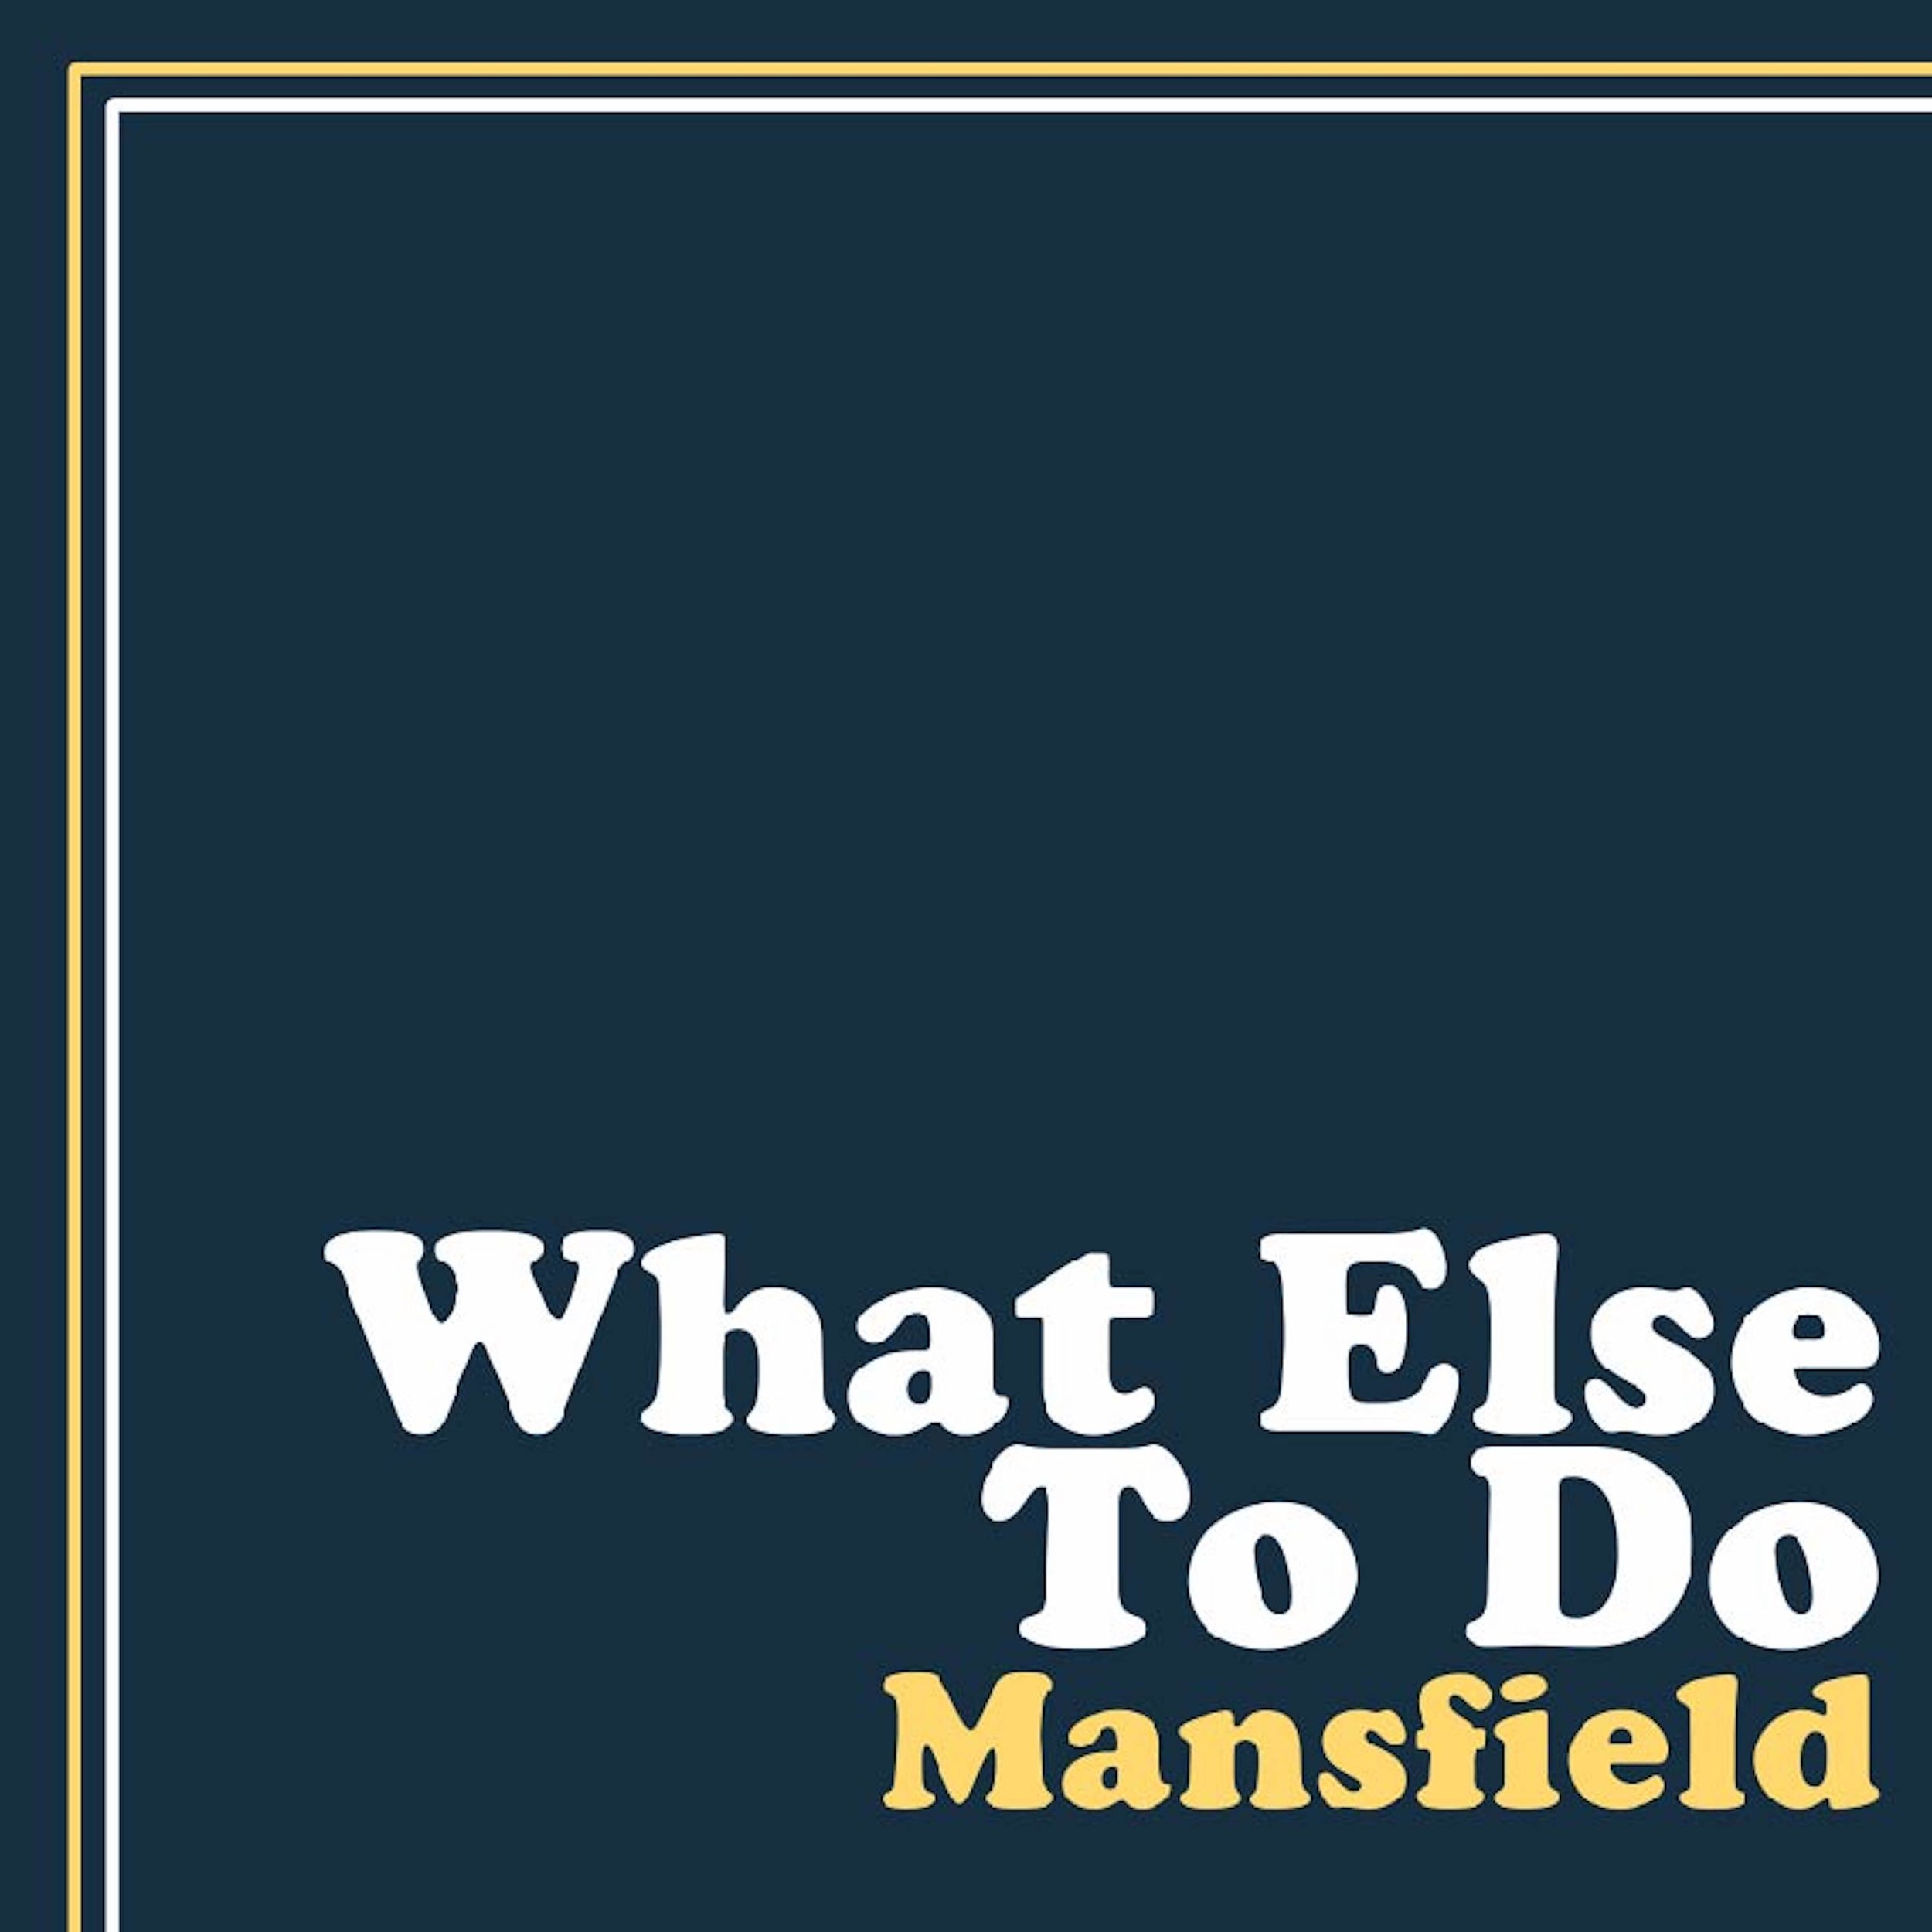 MANSFIELD - What Else To Do Cover.jpg